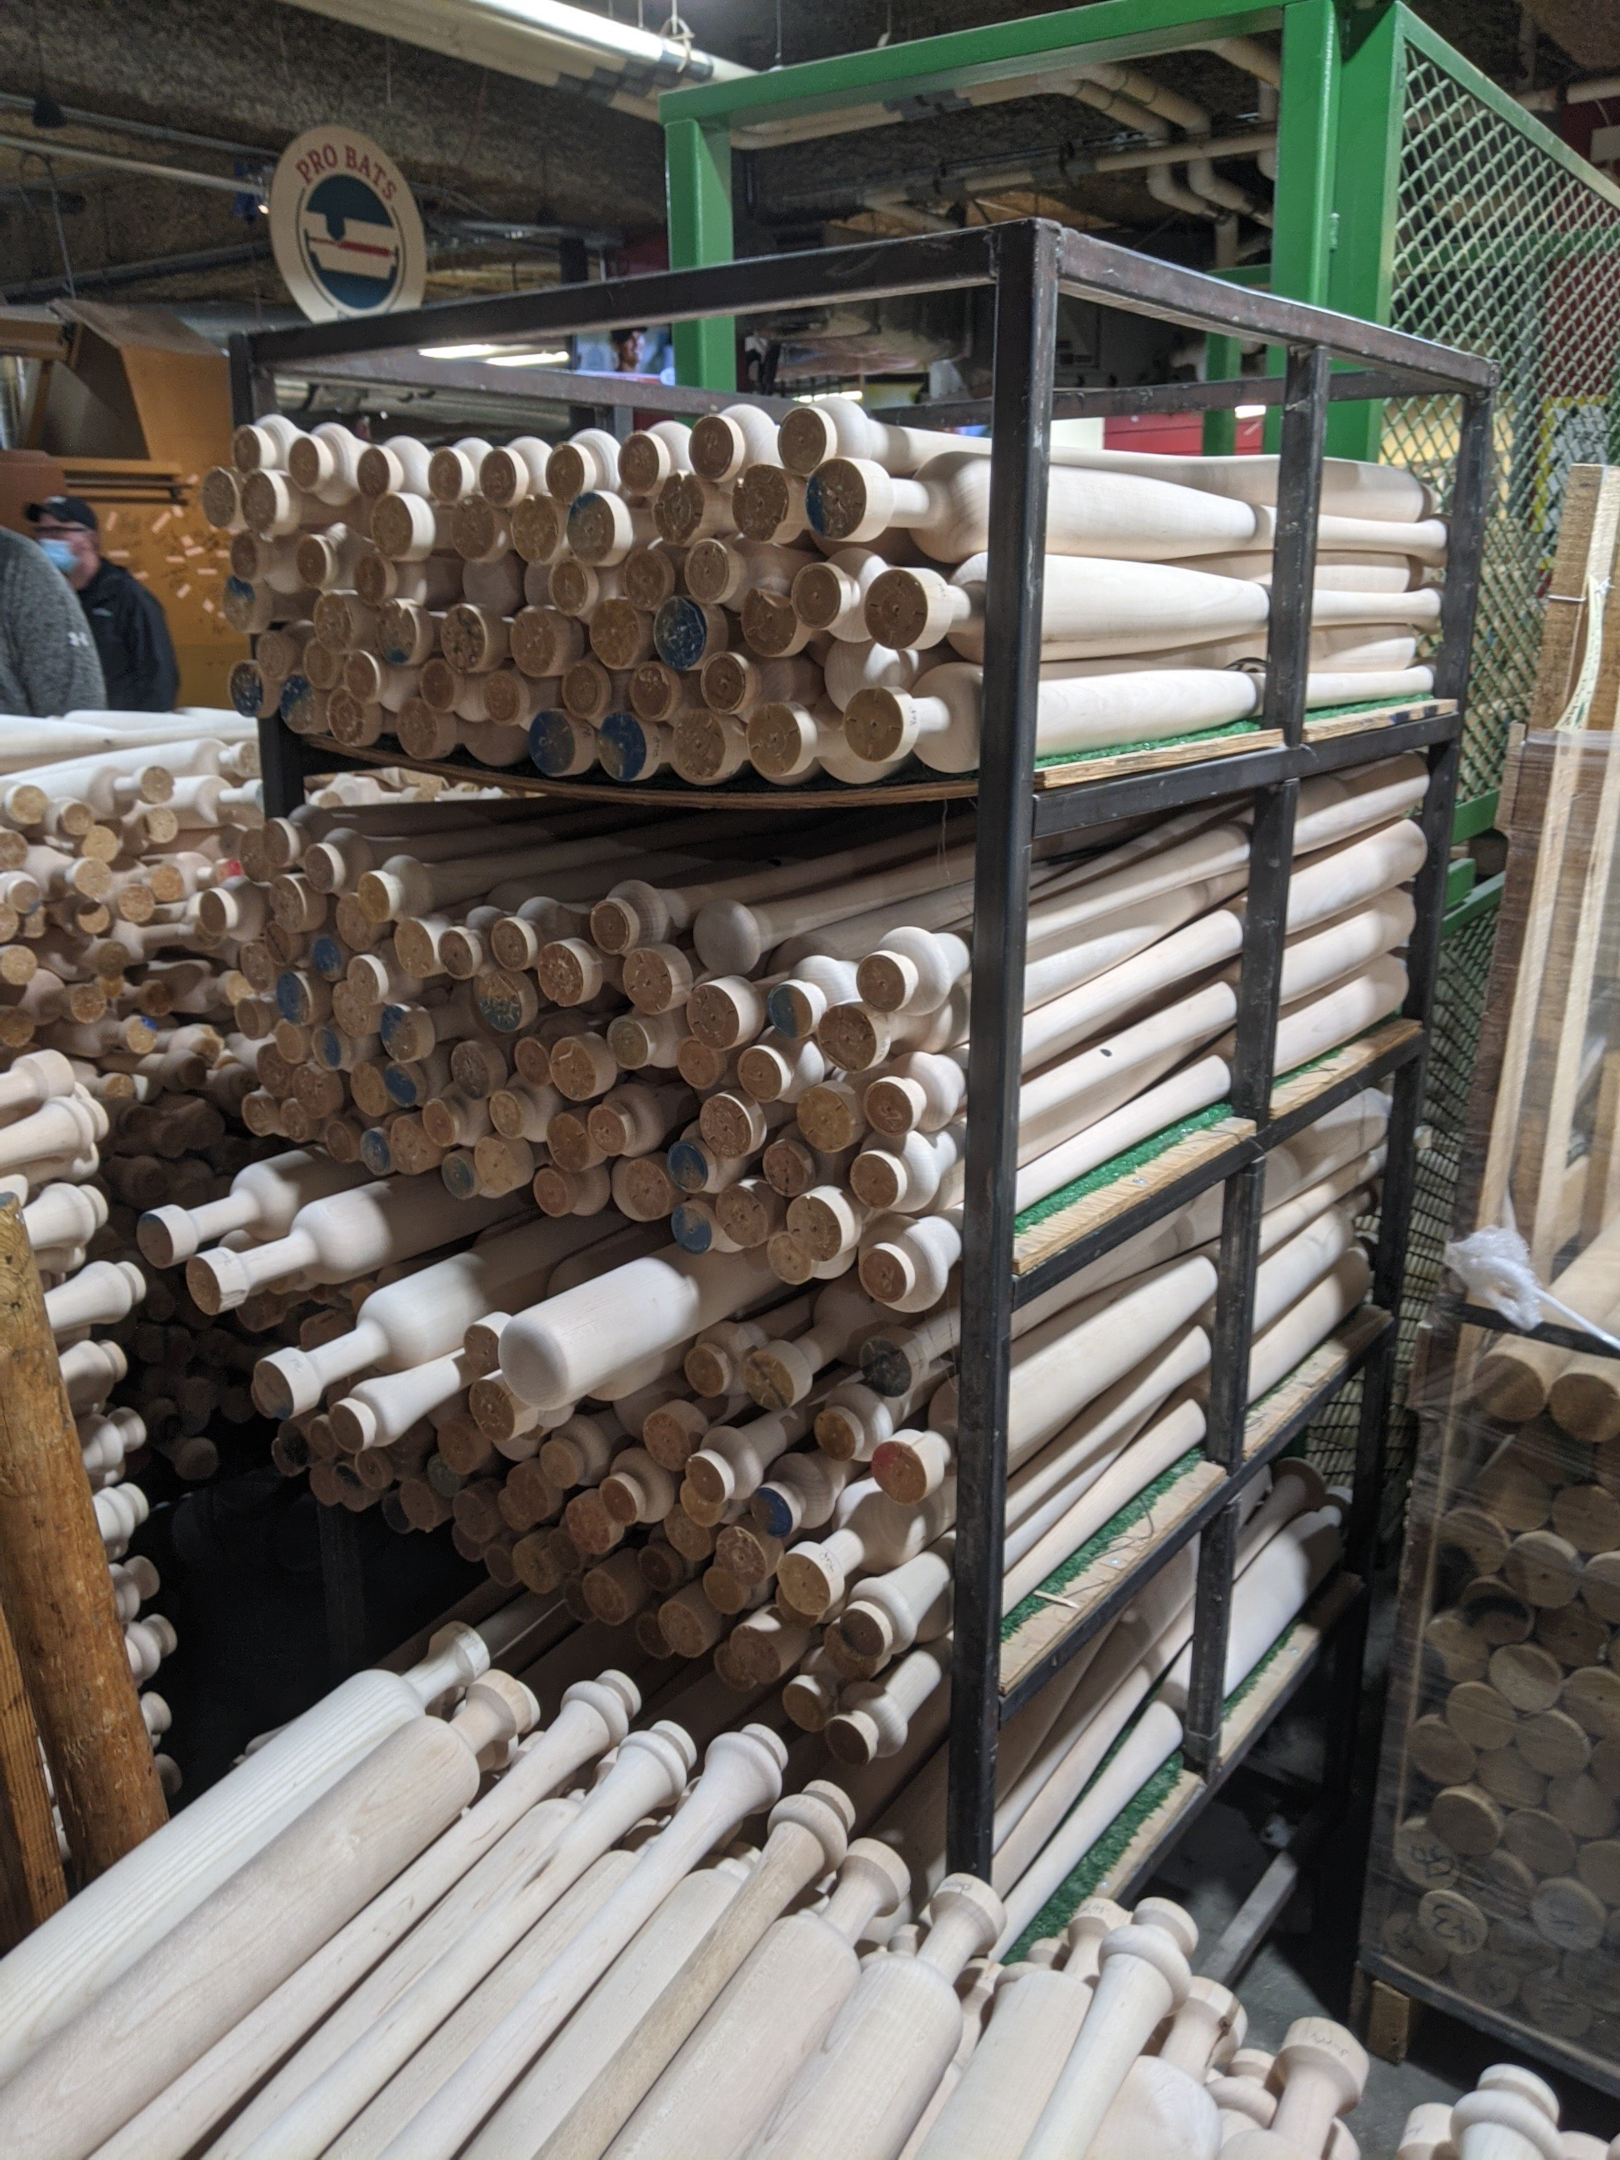 A rack of wooden bats about to be manufactured.